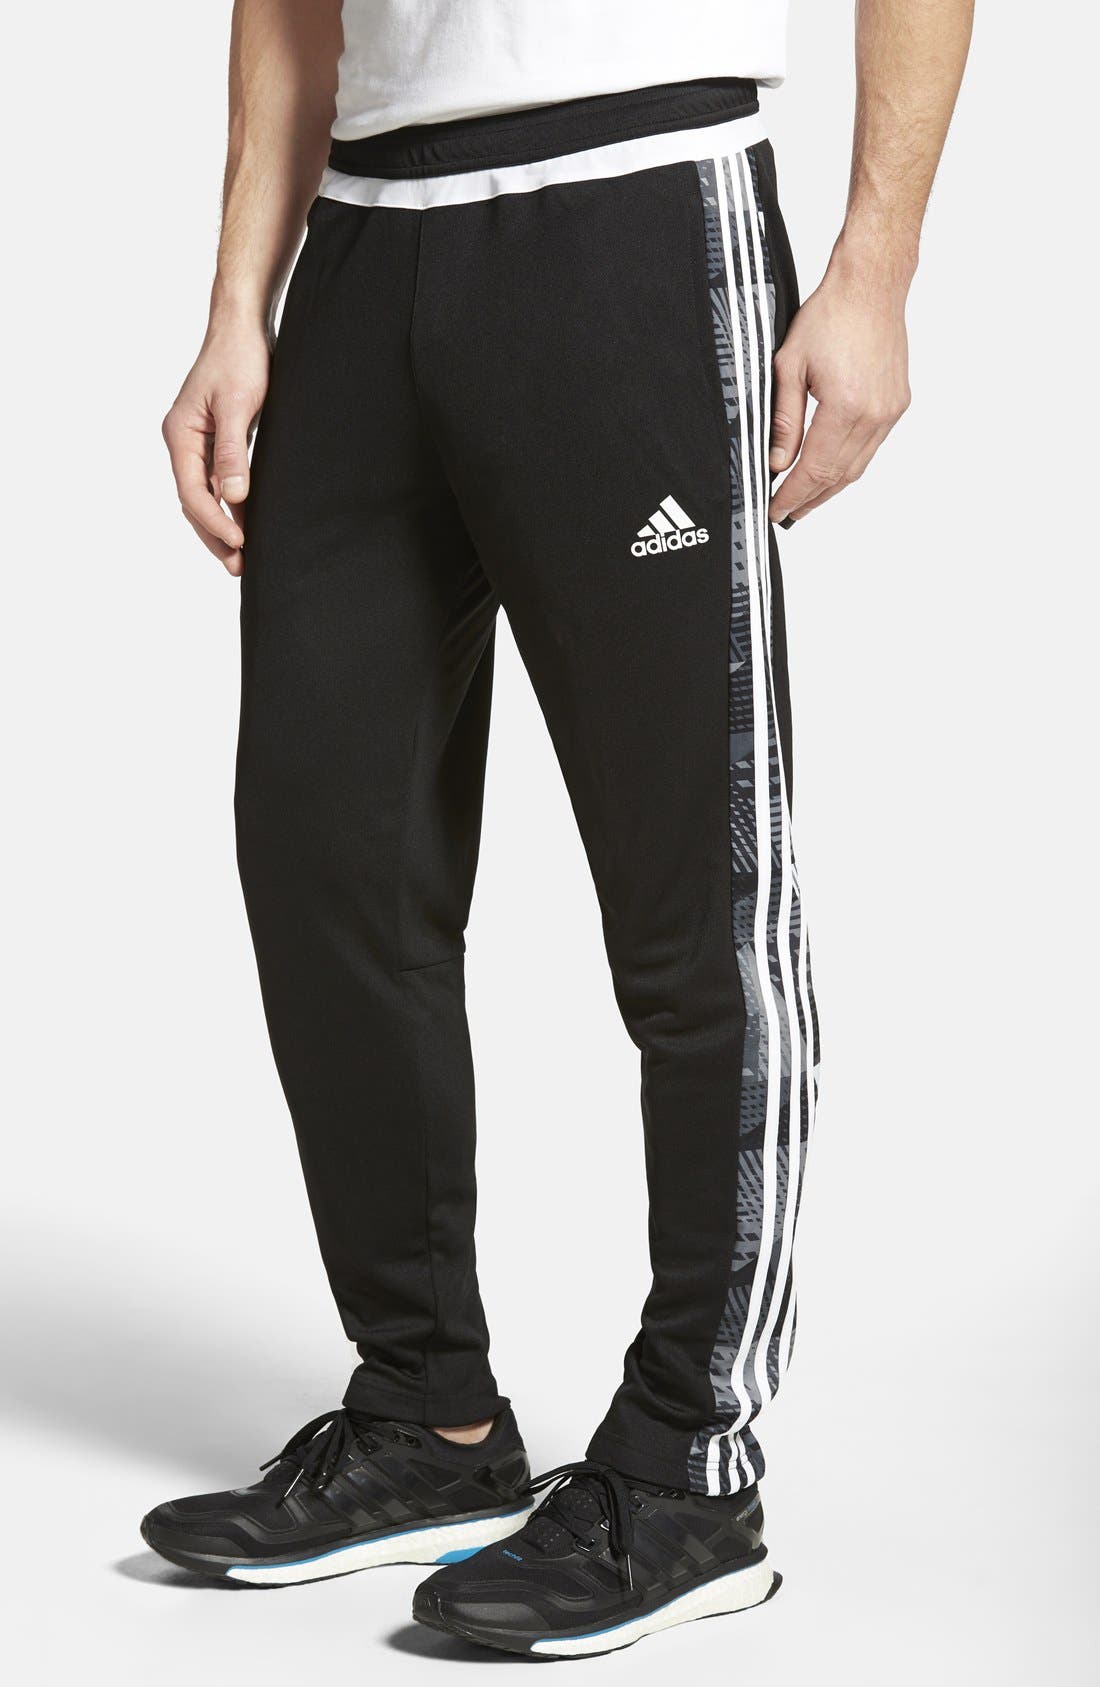 adidas soccer pants outfit